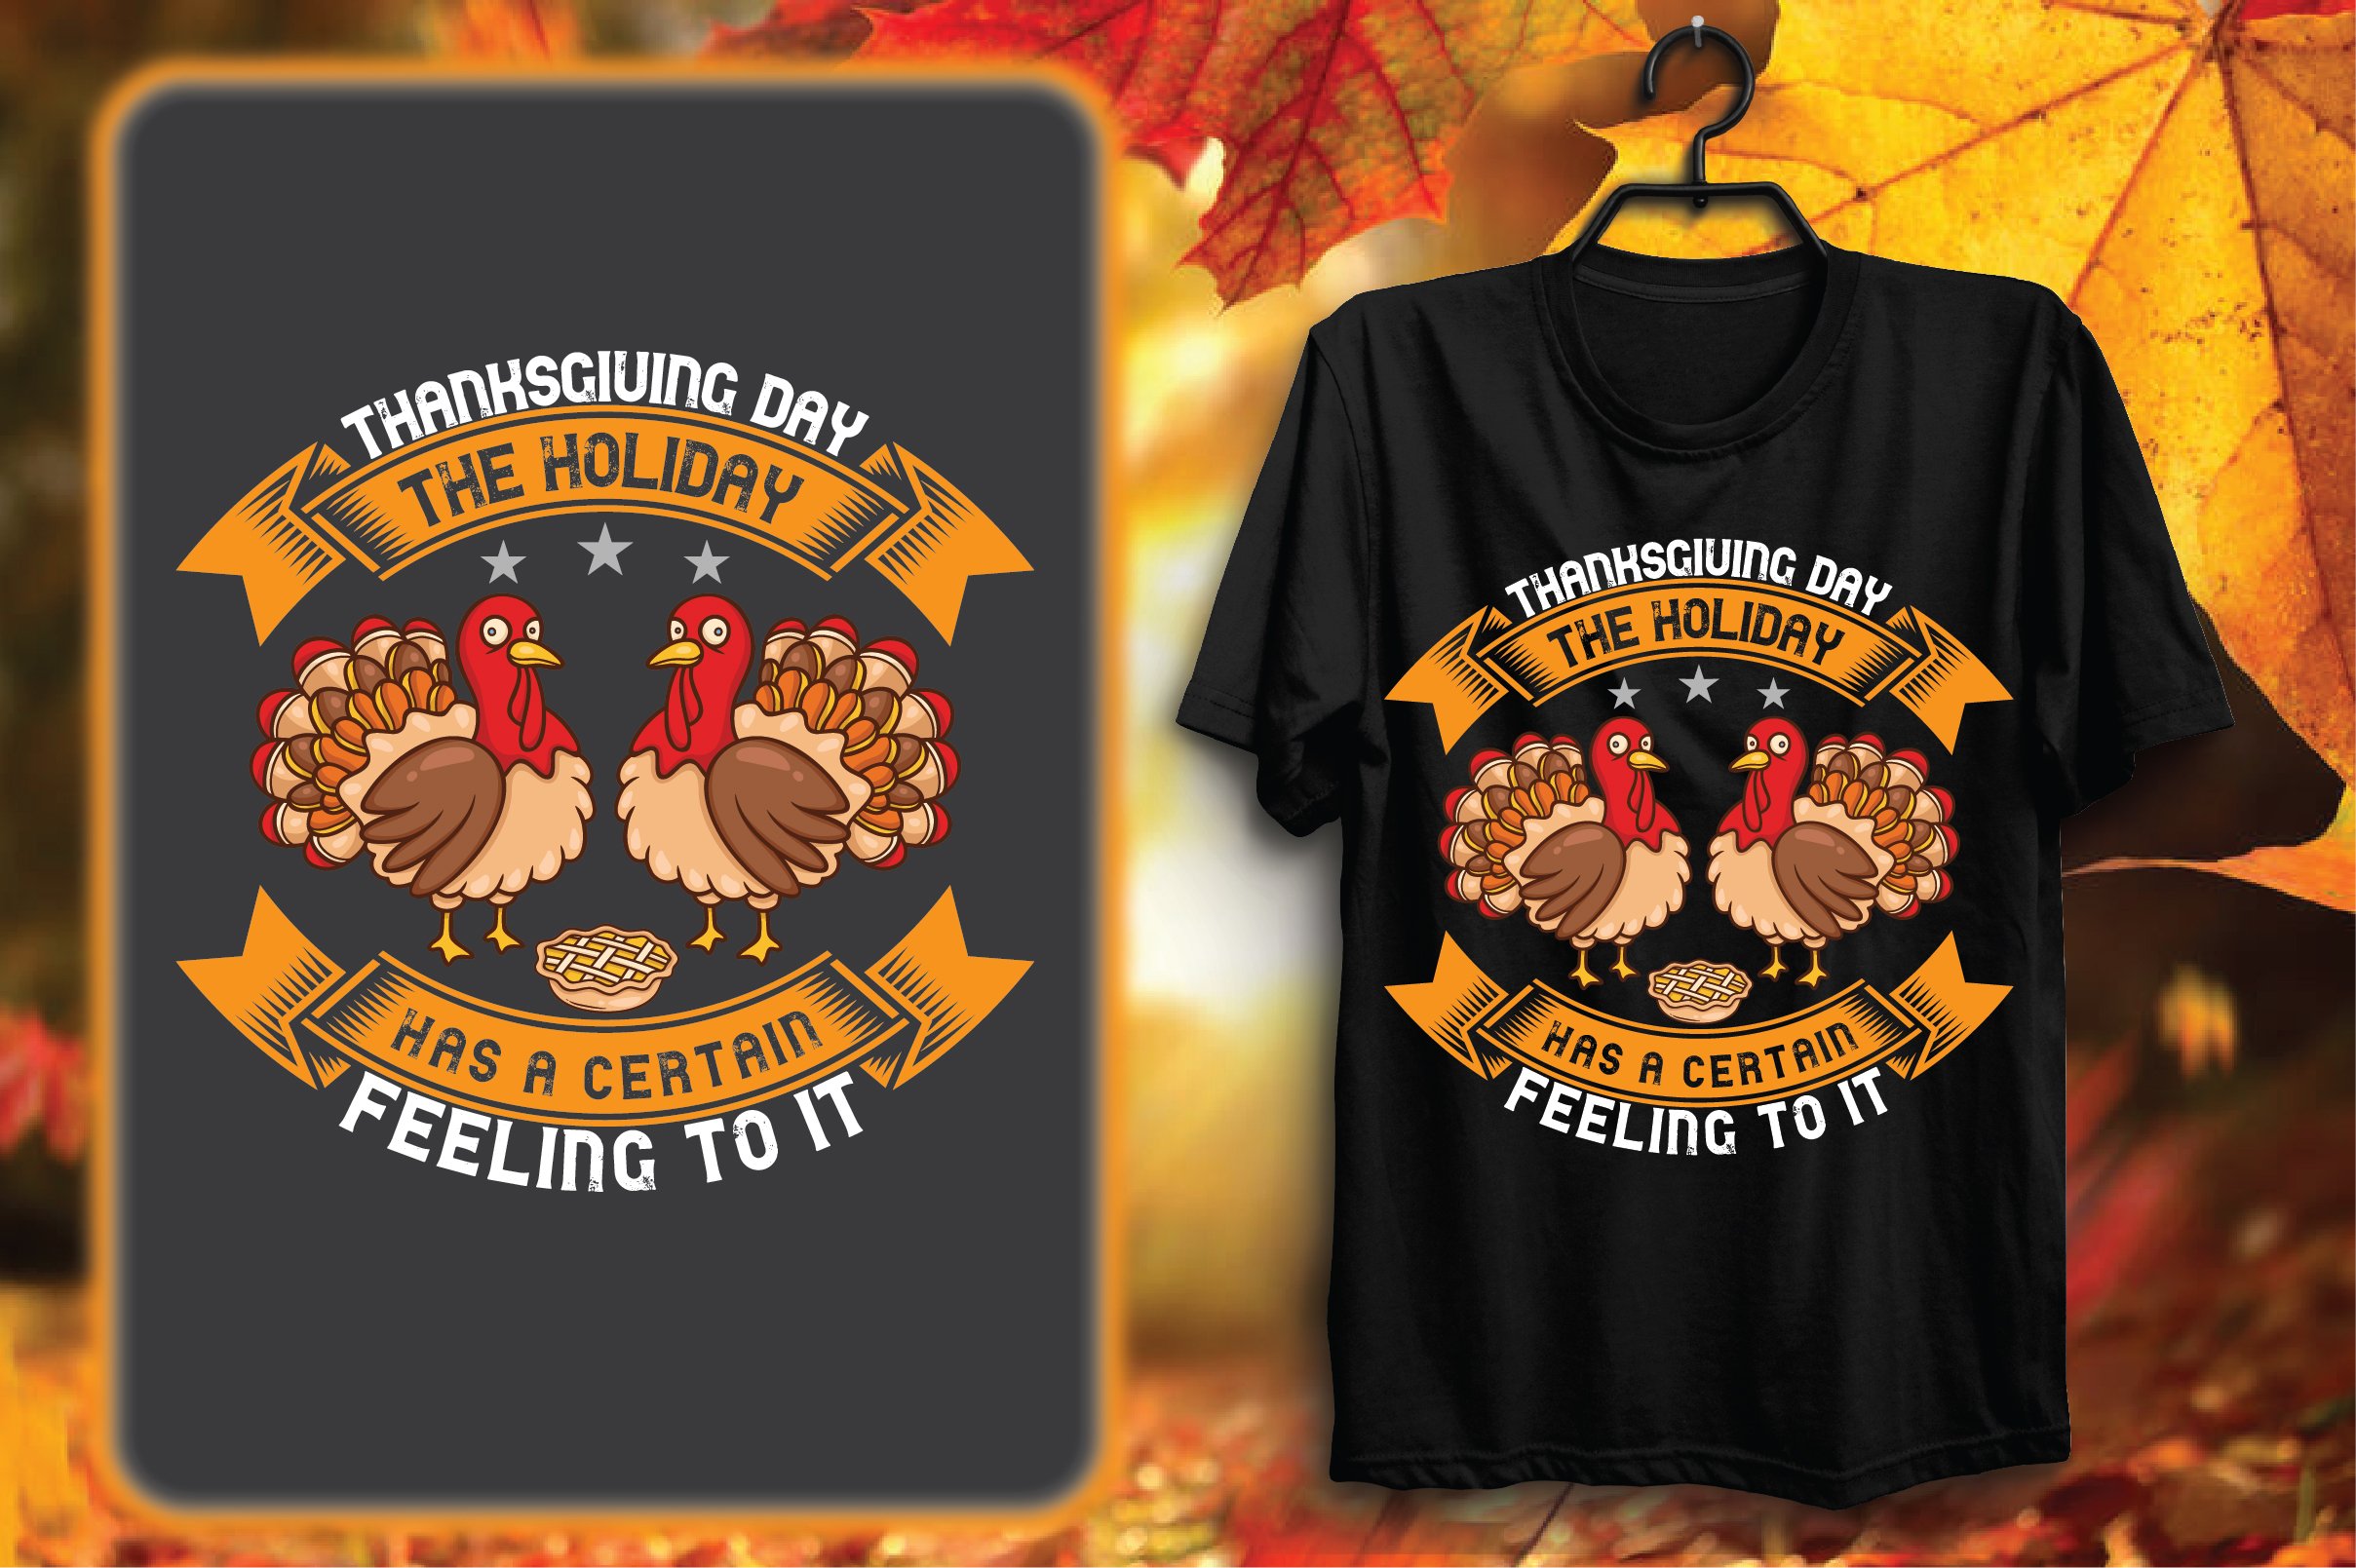 Two cool turkeys on a simple black t-shirt.